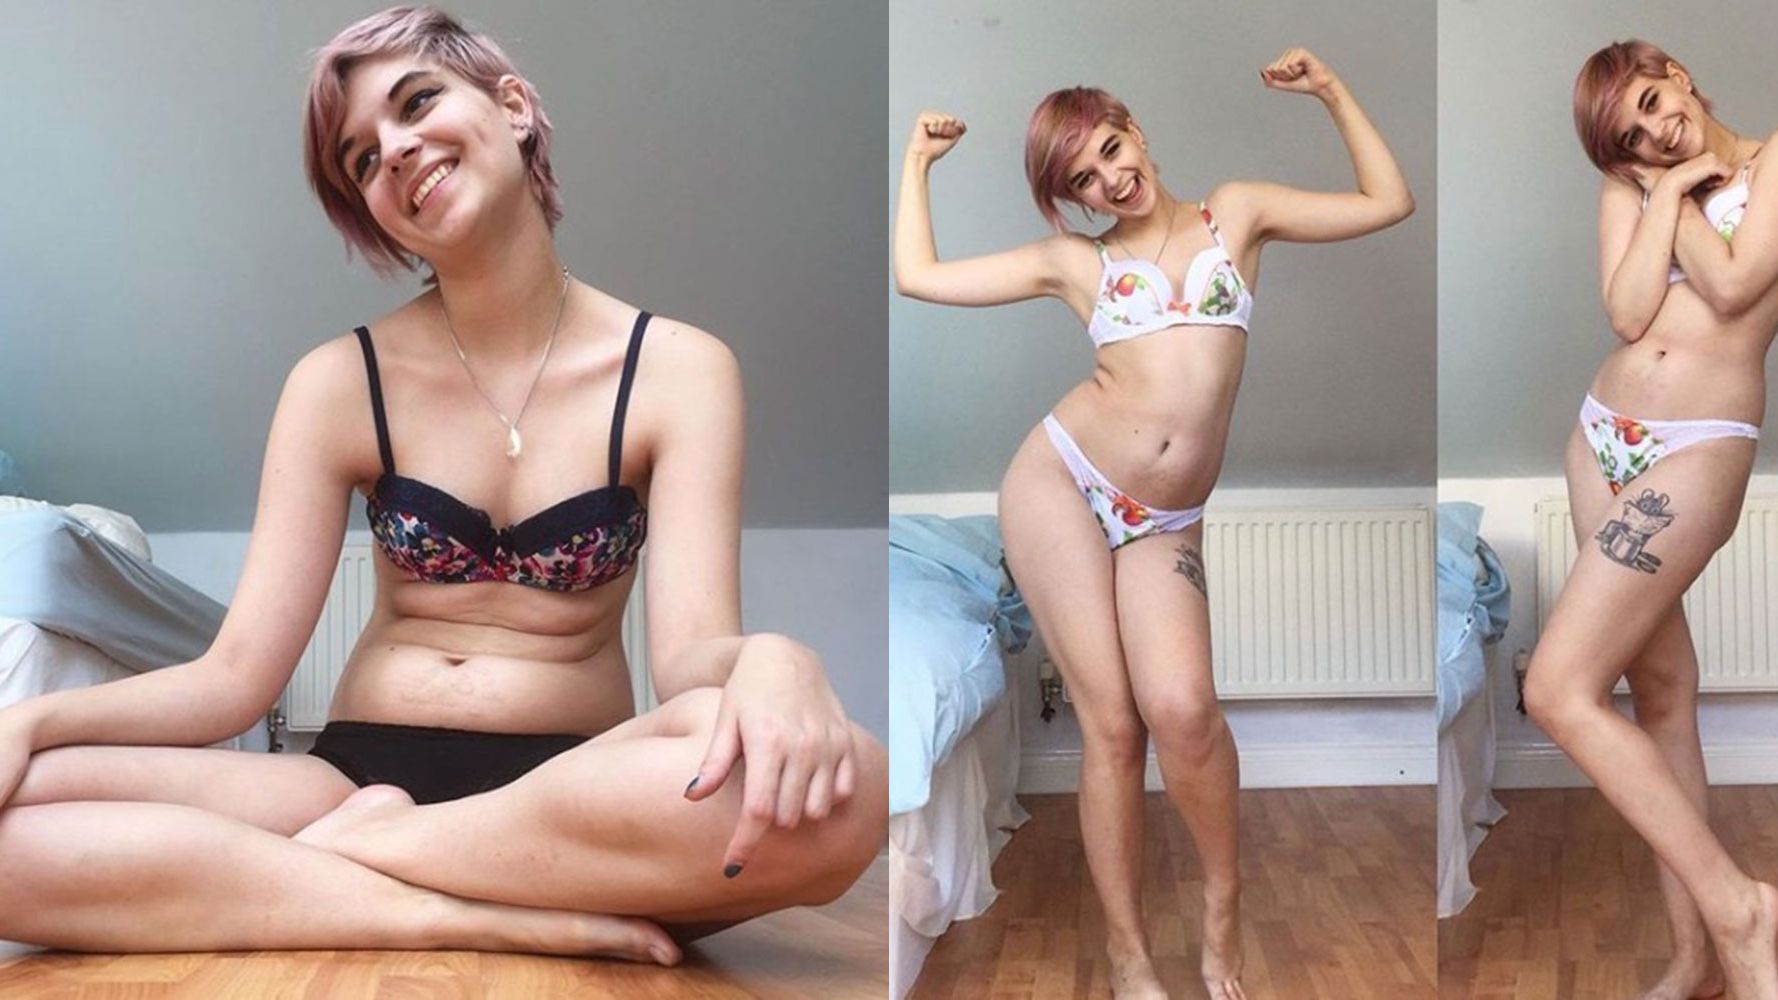 anorexia before and after pictures of people with anorexia